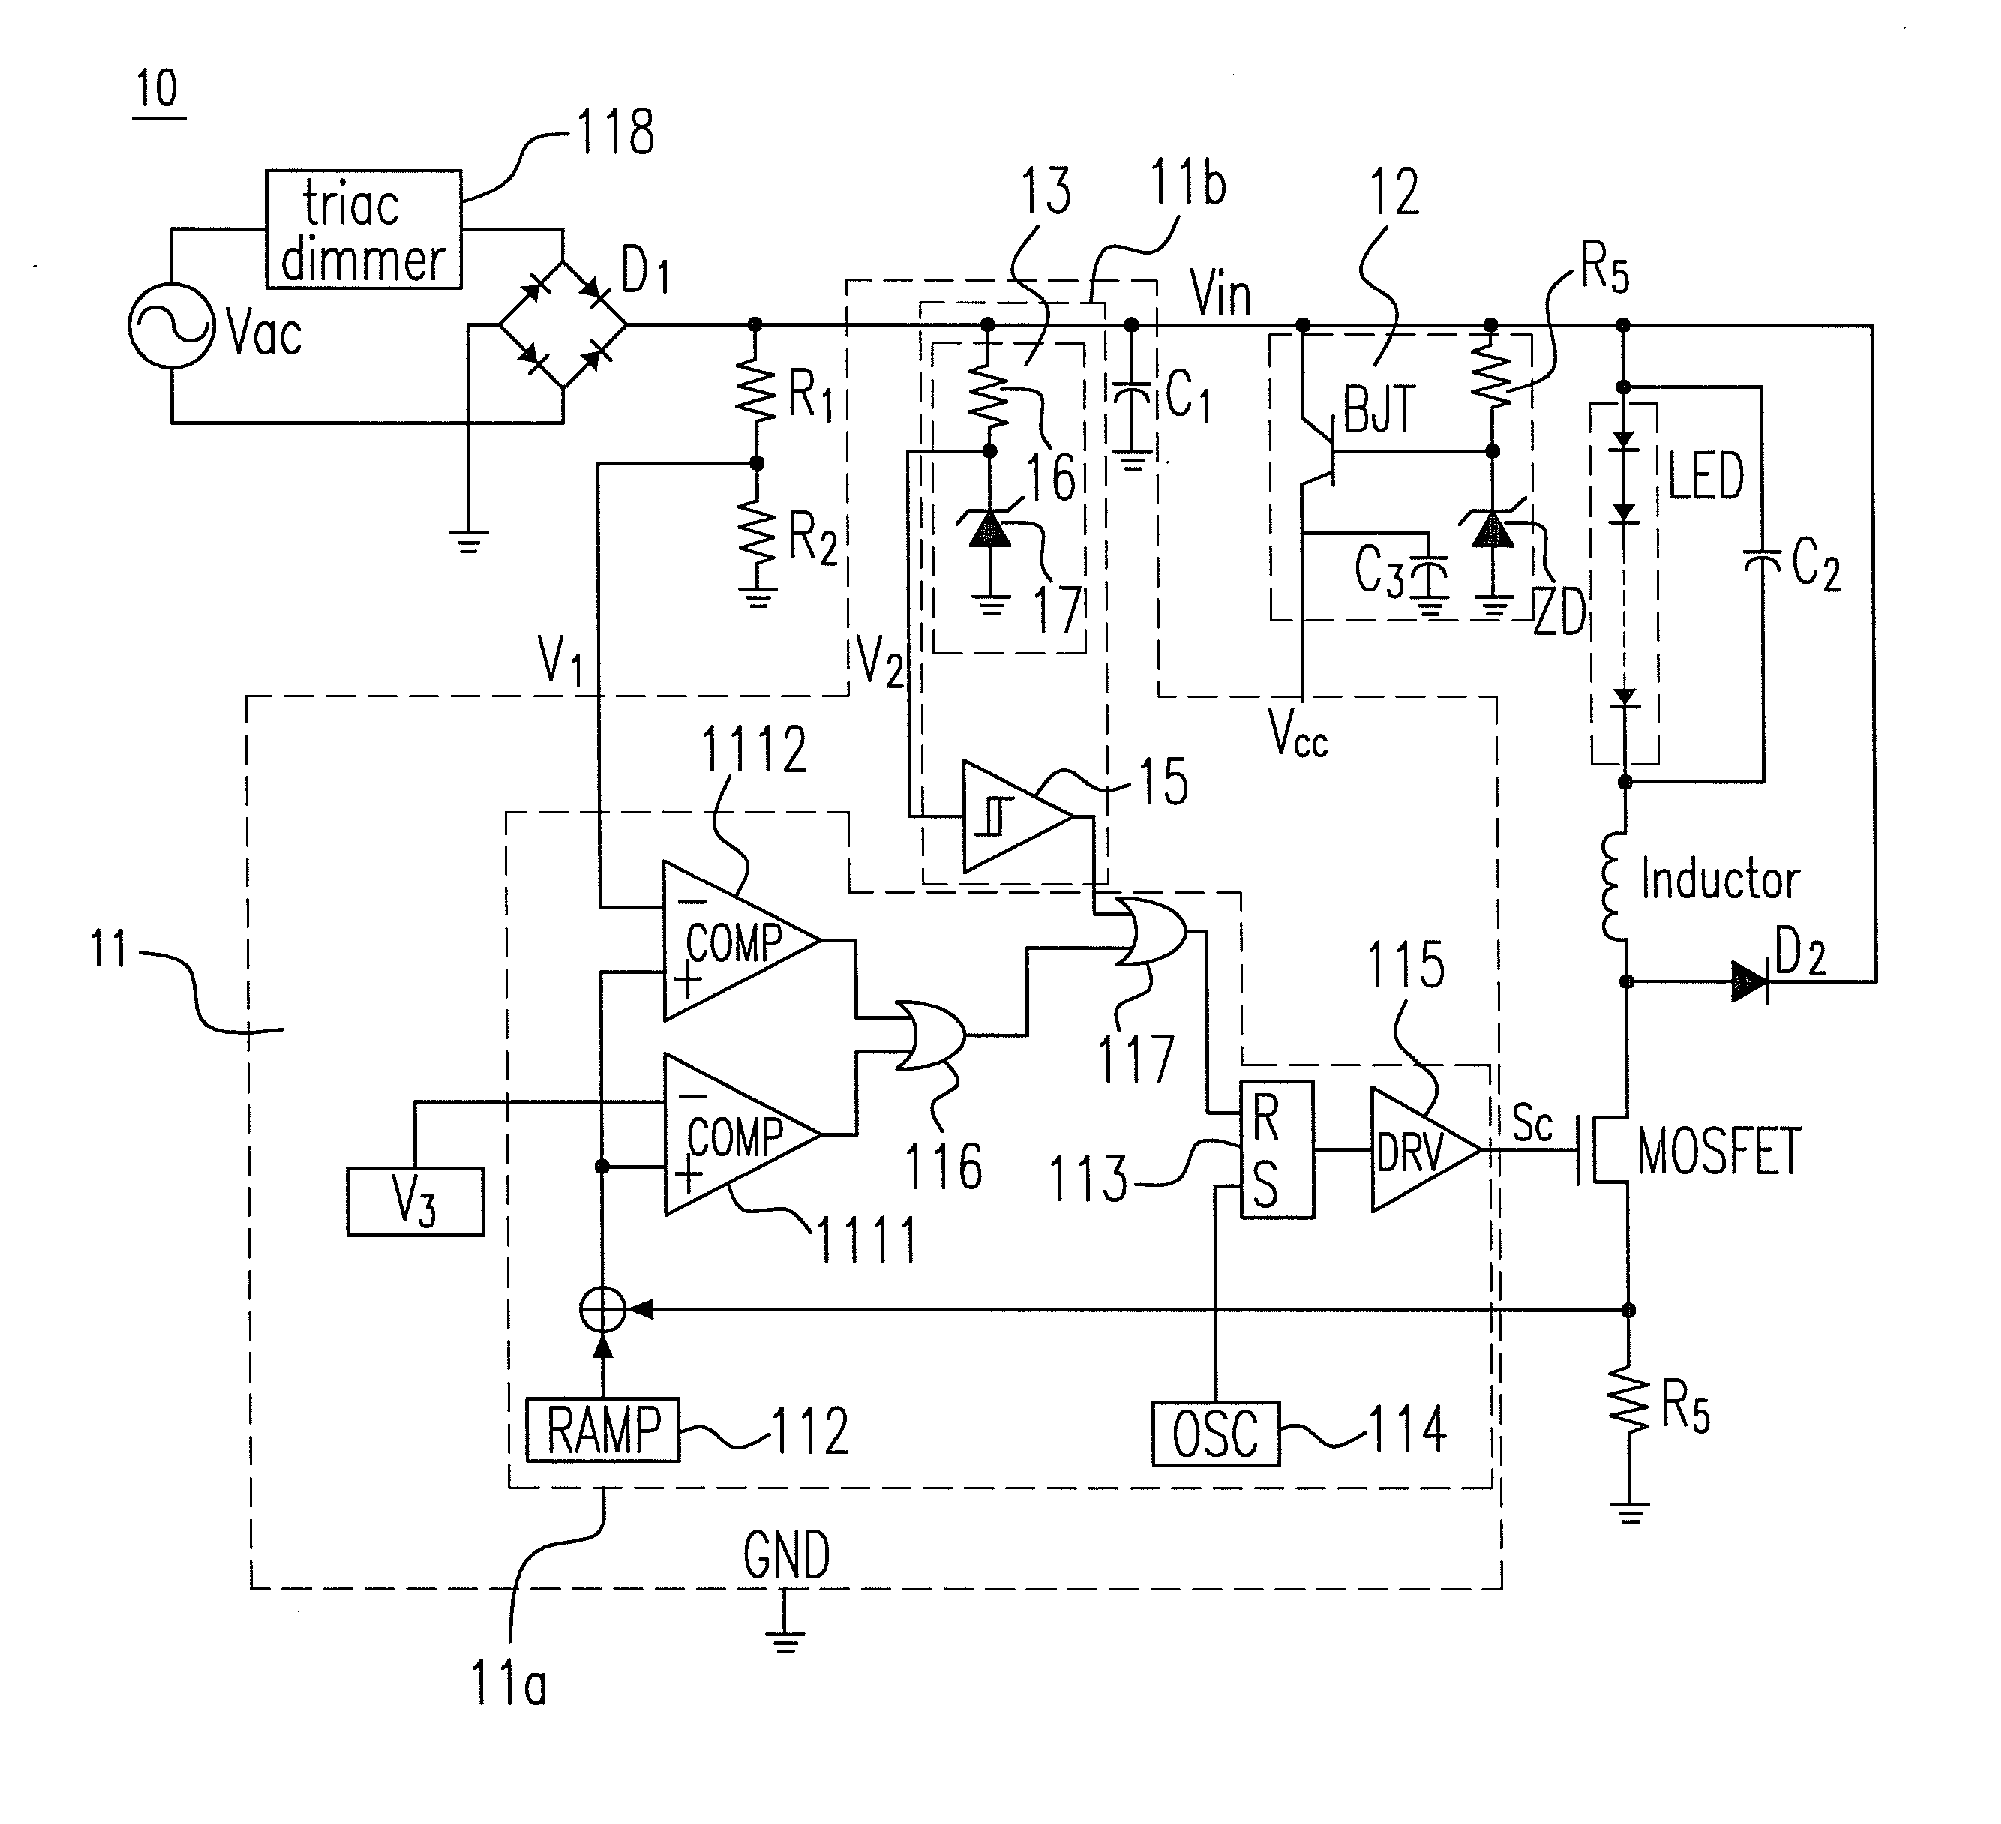 Driving circuit for LED